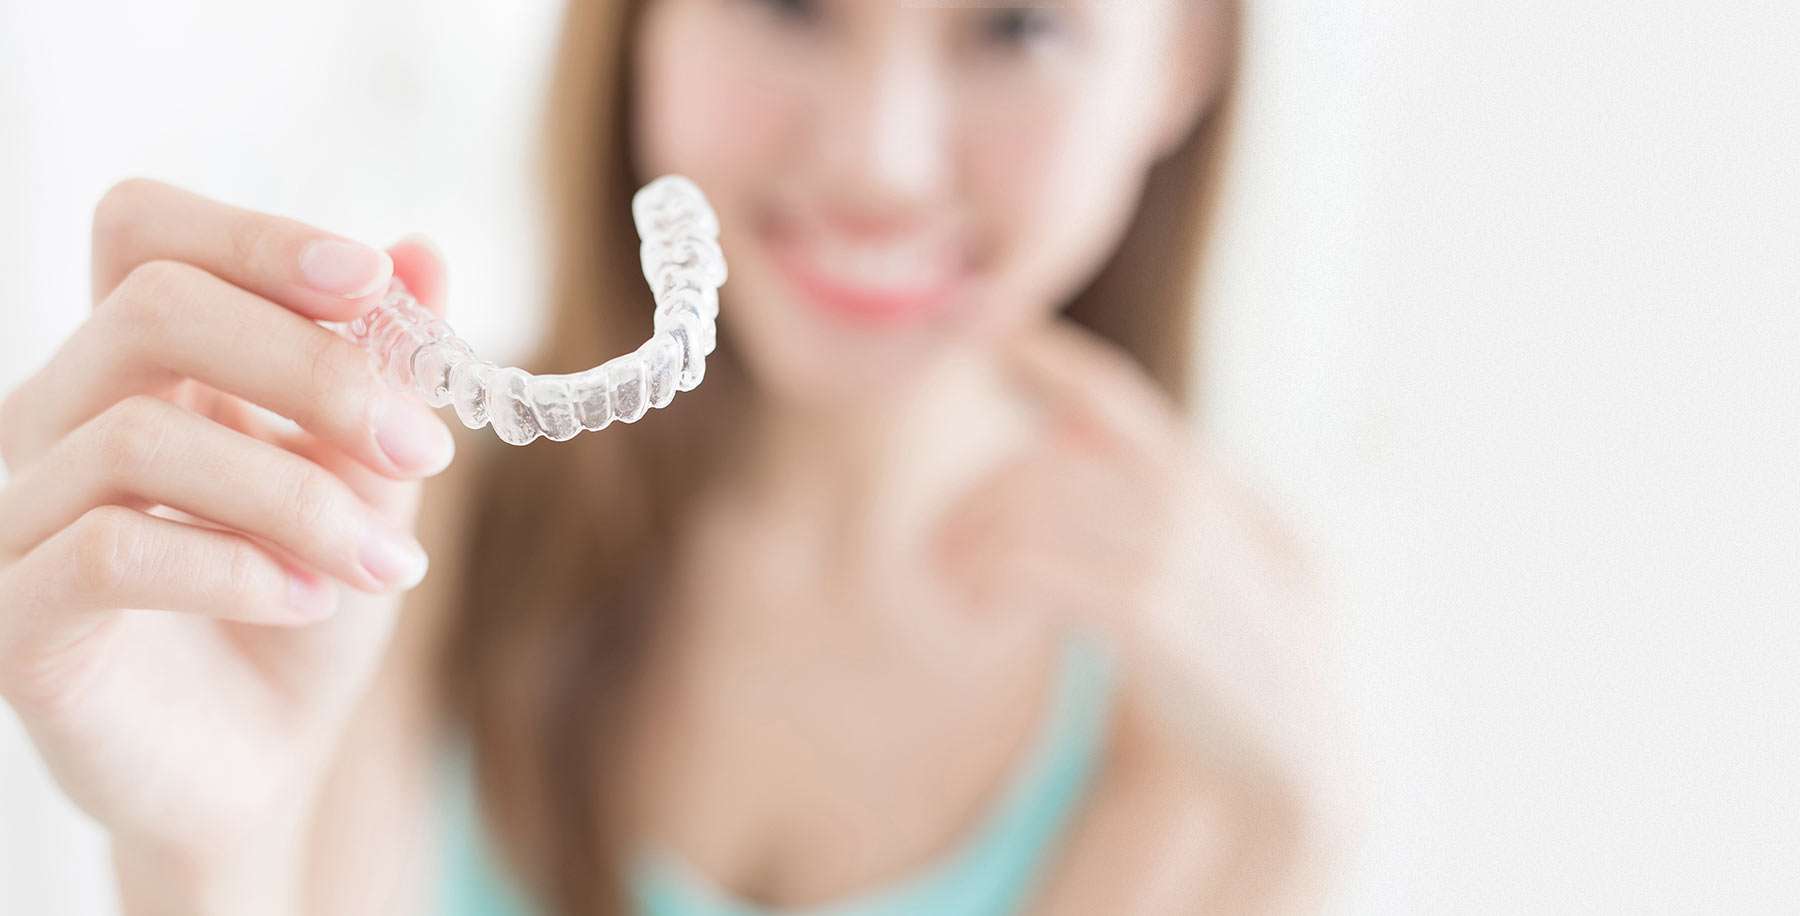 Up to $1000 off Invisalign® treatment!